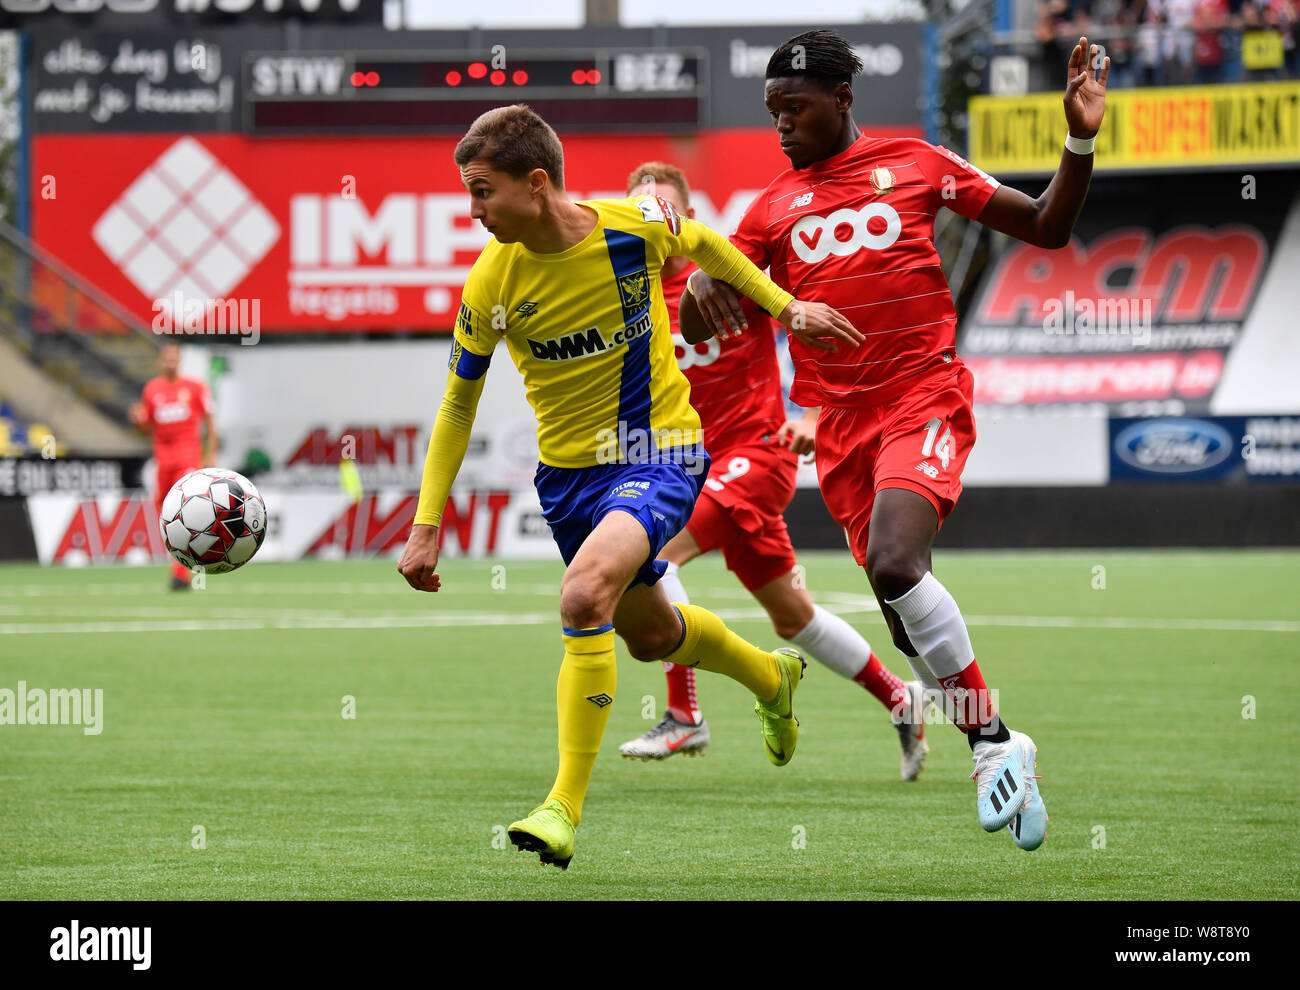 SINT-TRUIDEN, BELGIUM - AUGUST 11: Wolke Janssens of STVV fight for the ball with Anthony Limbombe of Standard during the Jupiler Pro League match day 3 between STVV and Standard de Liege on August 11, 2019 in Sint-Truiden, Belgium. (Photo by John Thys/Is Stock Photo